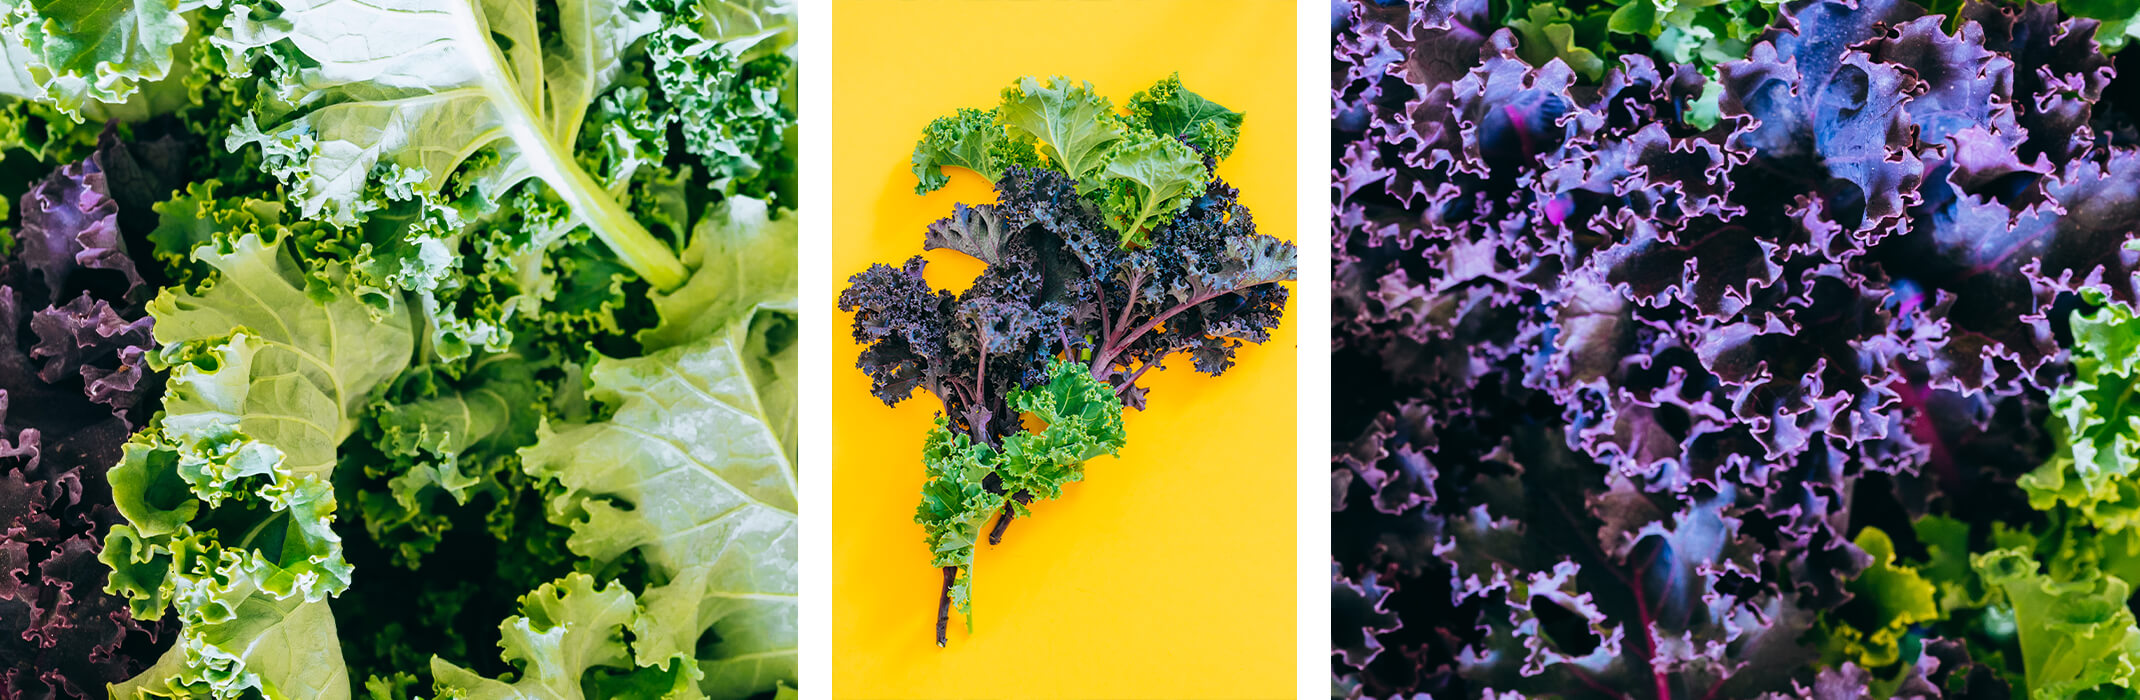 3 images of kale: closeup of mostly green kale, green and purple kale on a yellow background, and mostly purple kale closeup